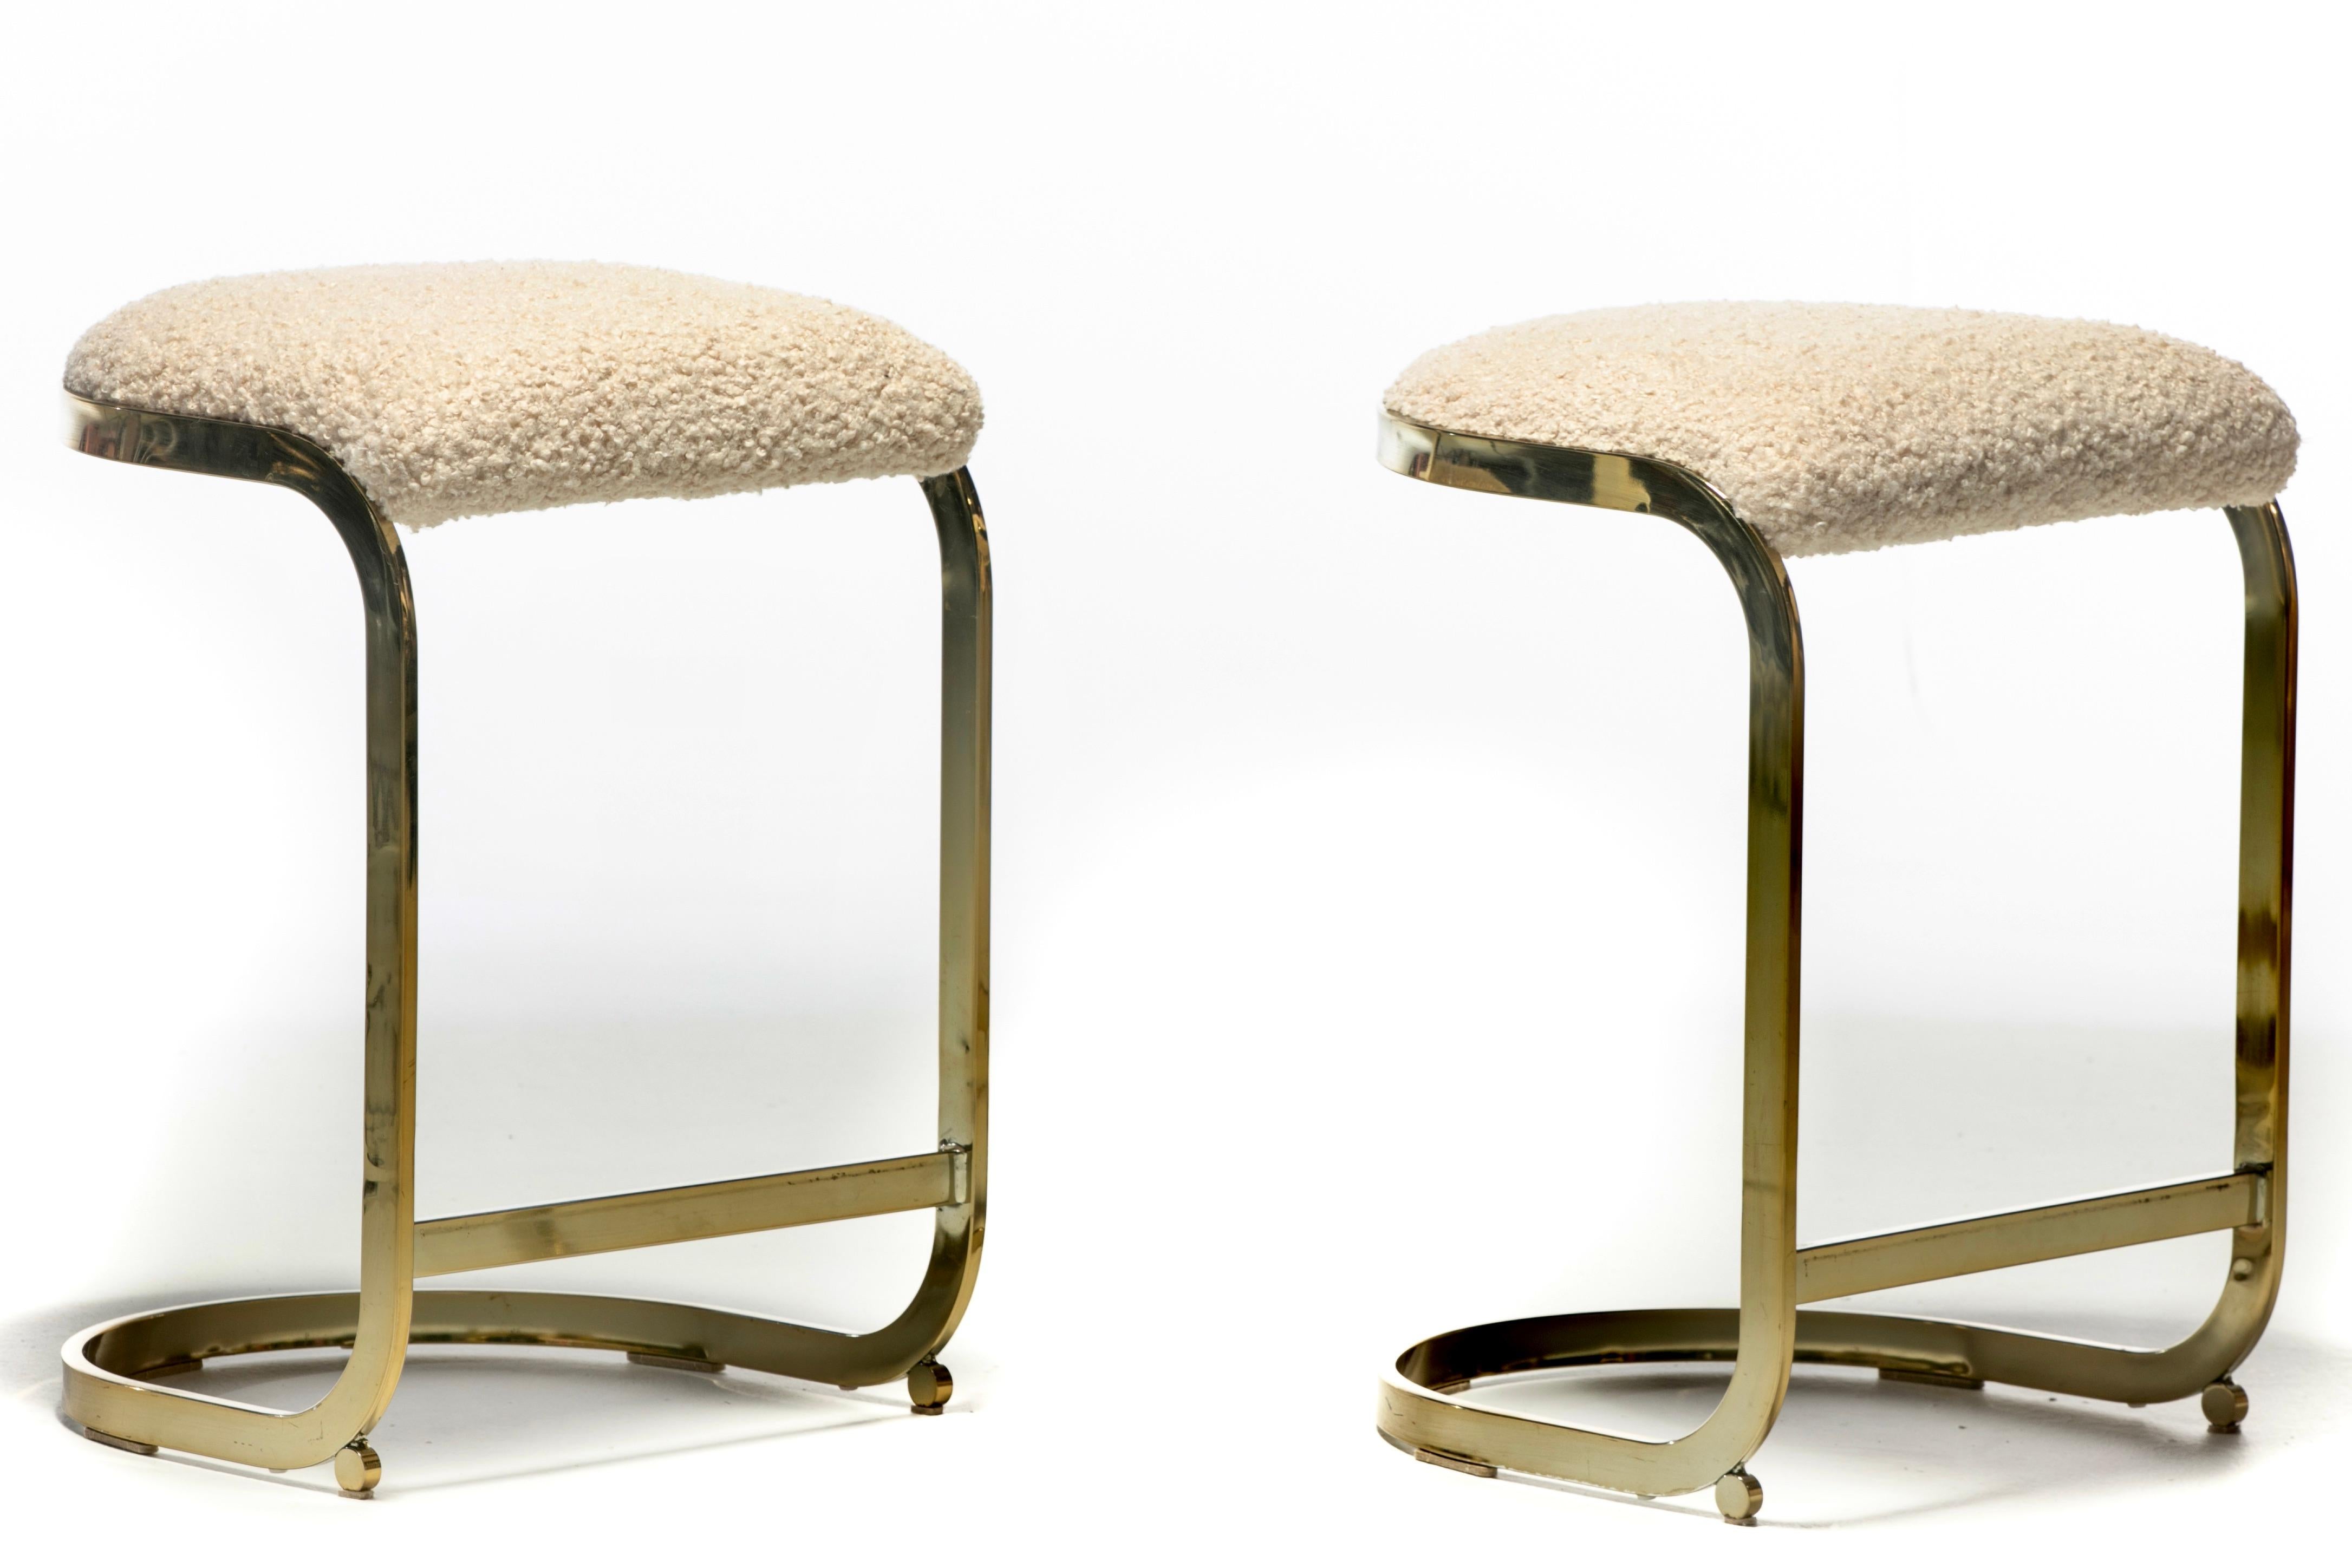 Set of 3 Design Institute of America Brass Stools in Ivory White Bouclé, c. 1980 In Good Condition For Sale In Saint Louis, MO